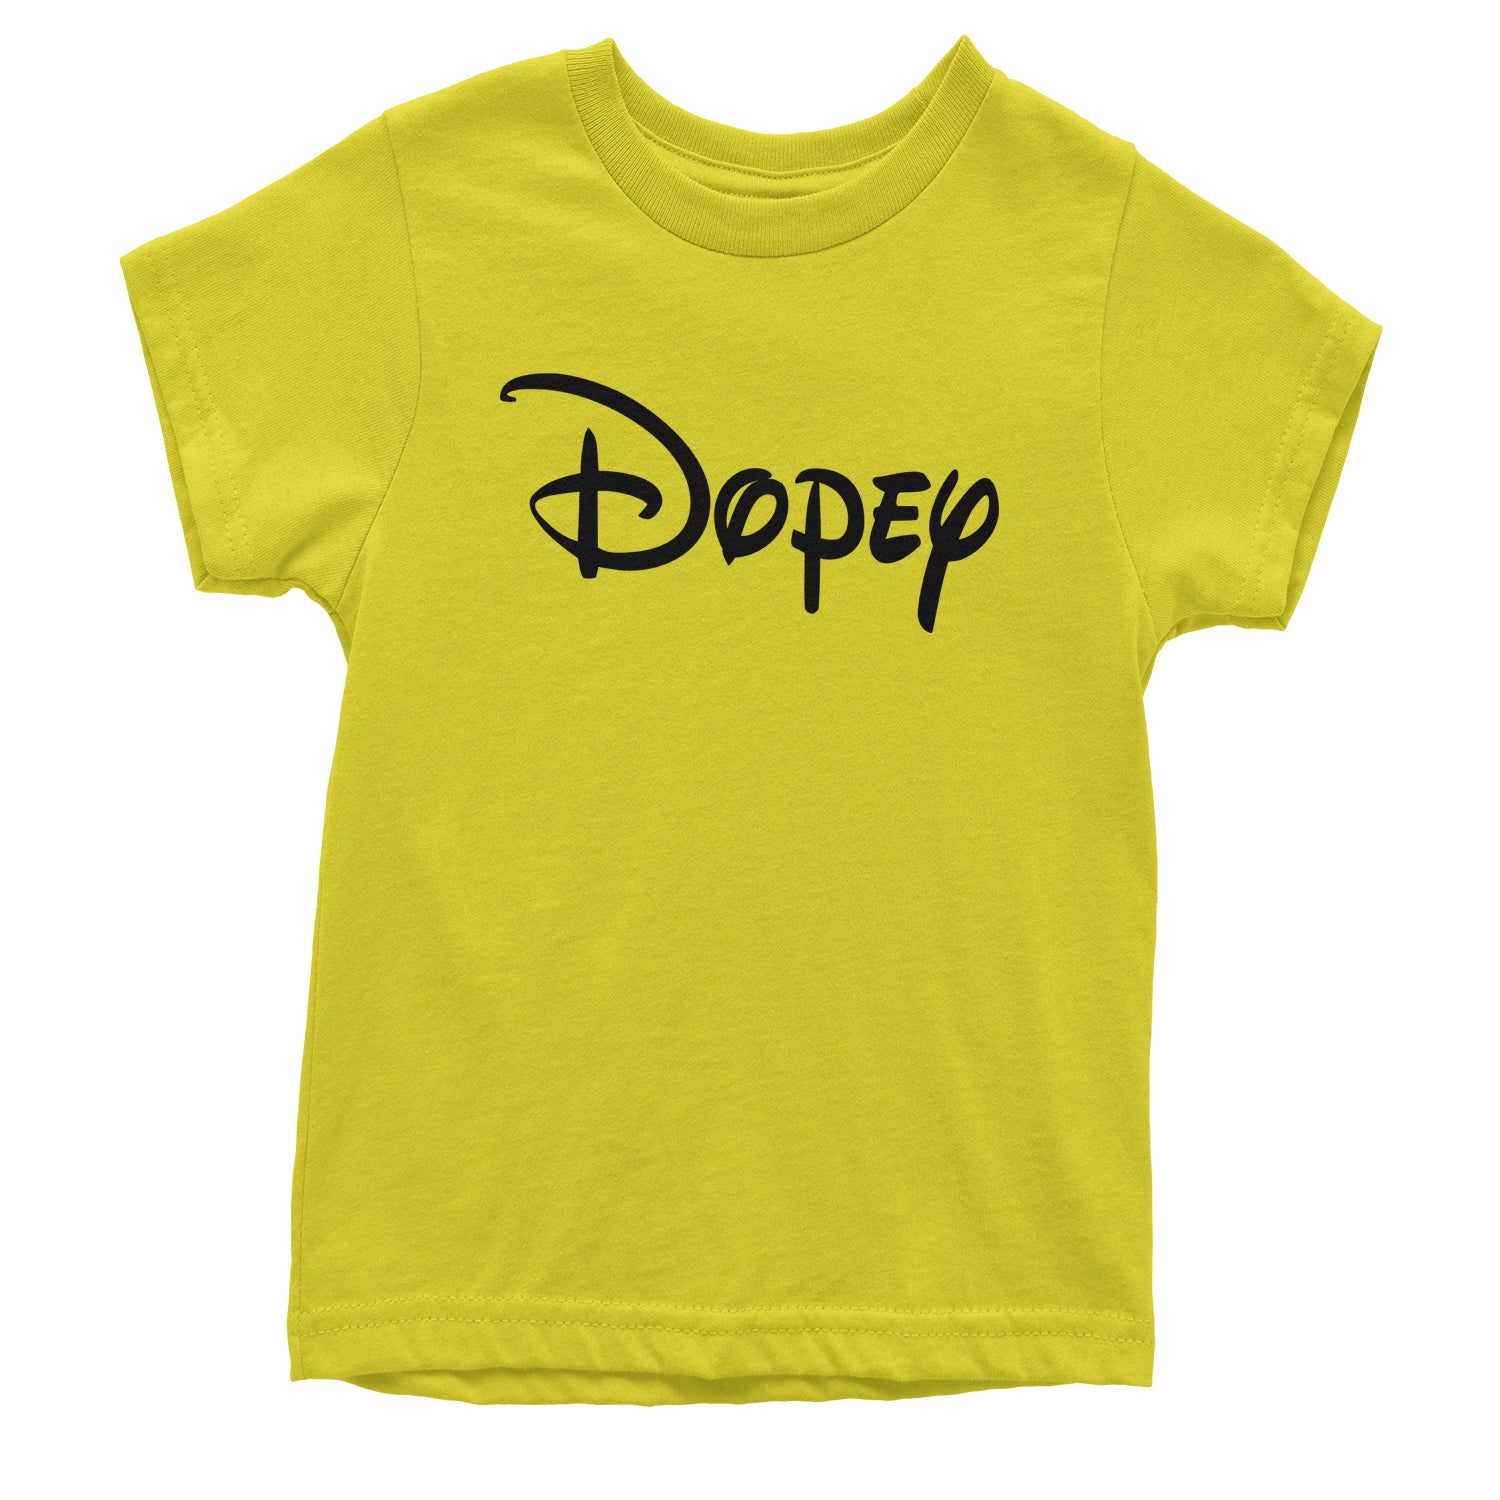 Dopey - 7 Dwarfs Costume Youth T-shirt and, costume, dwarfs, group, halloween, matching, seven, snow, the, white by Expression Tees